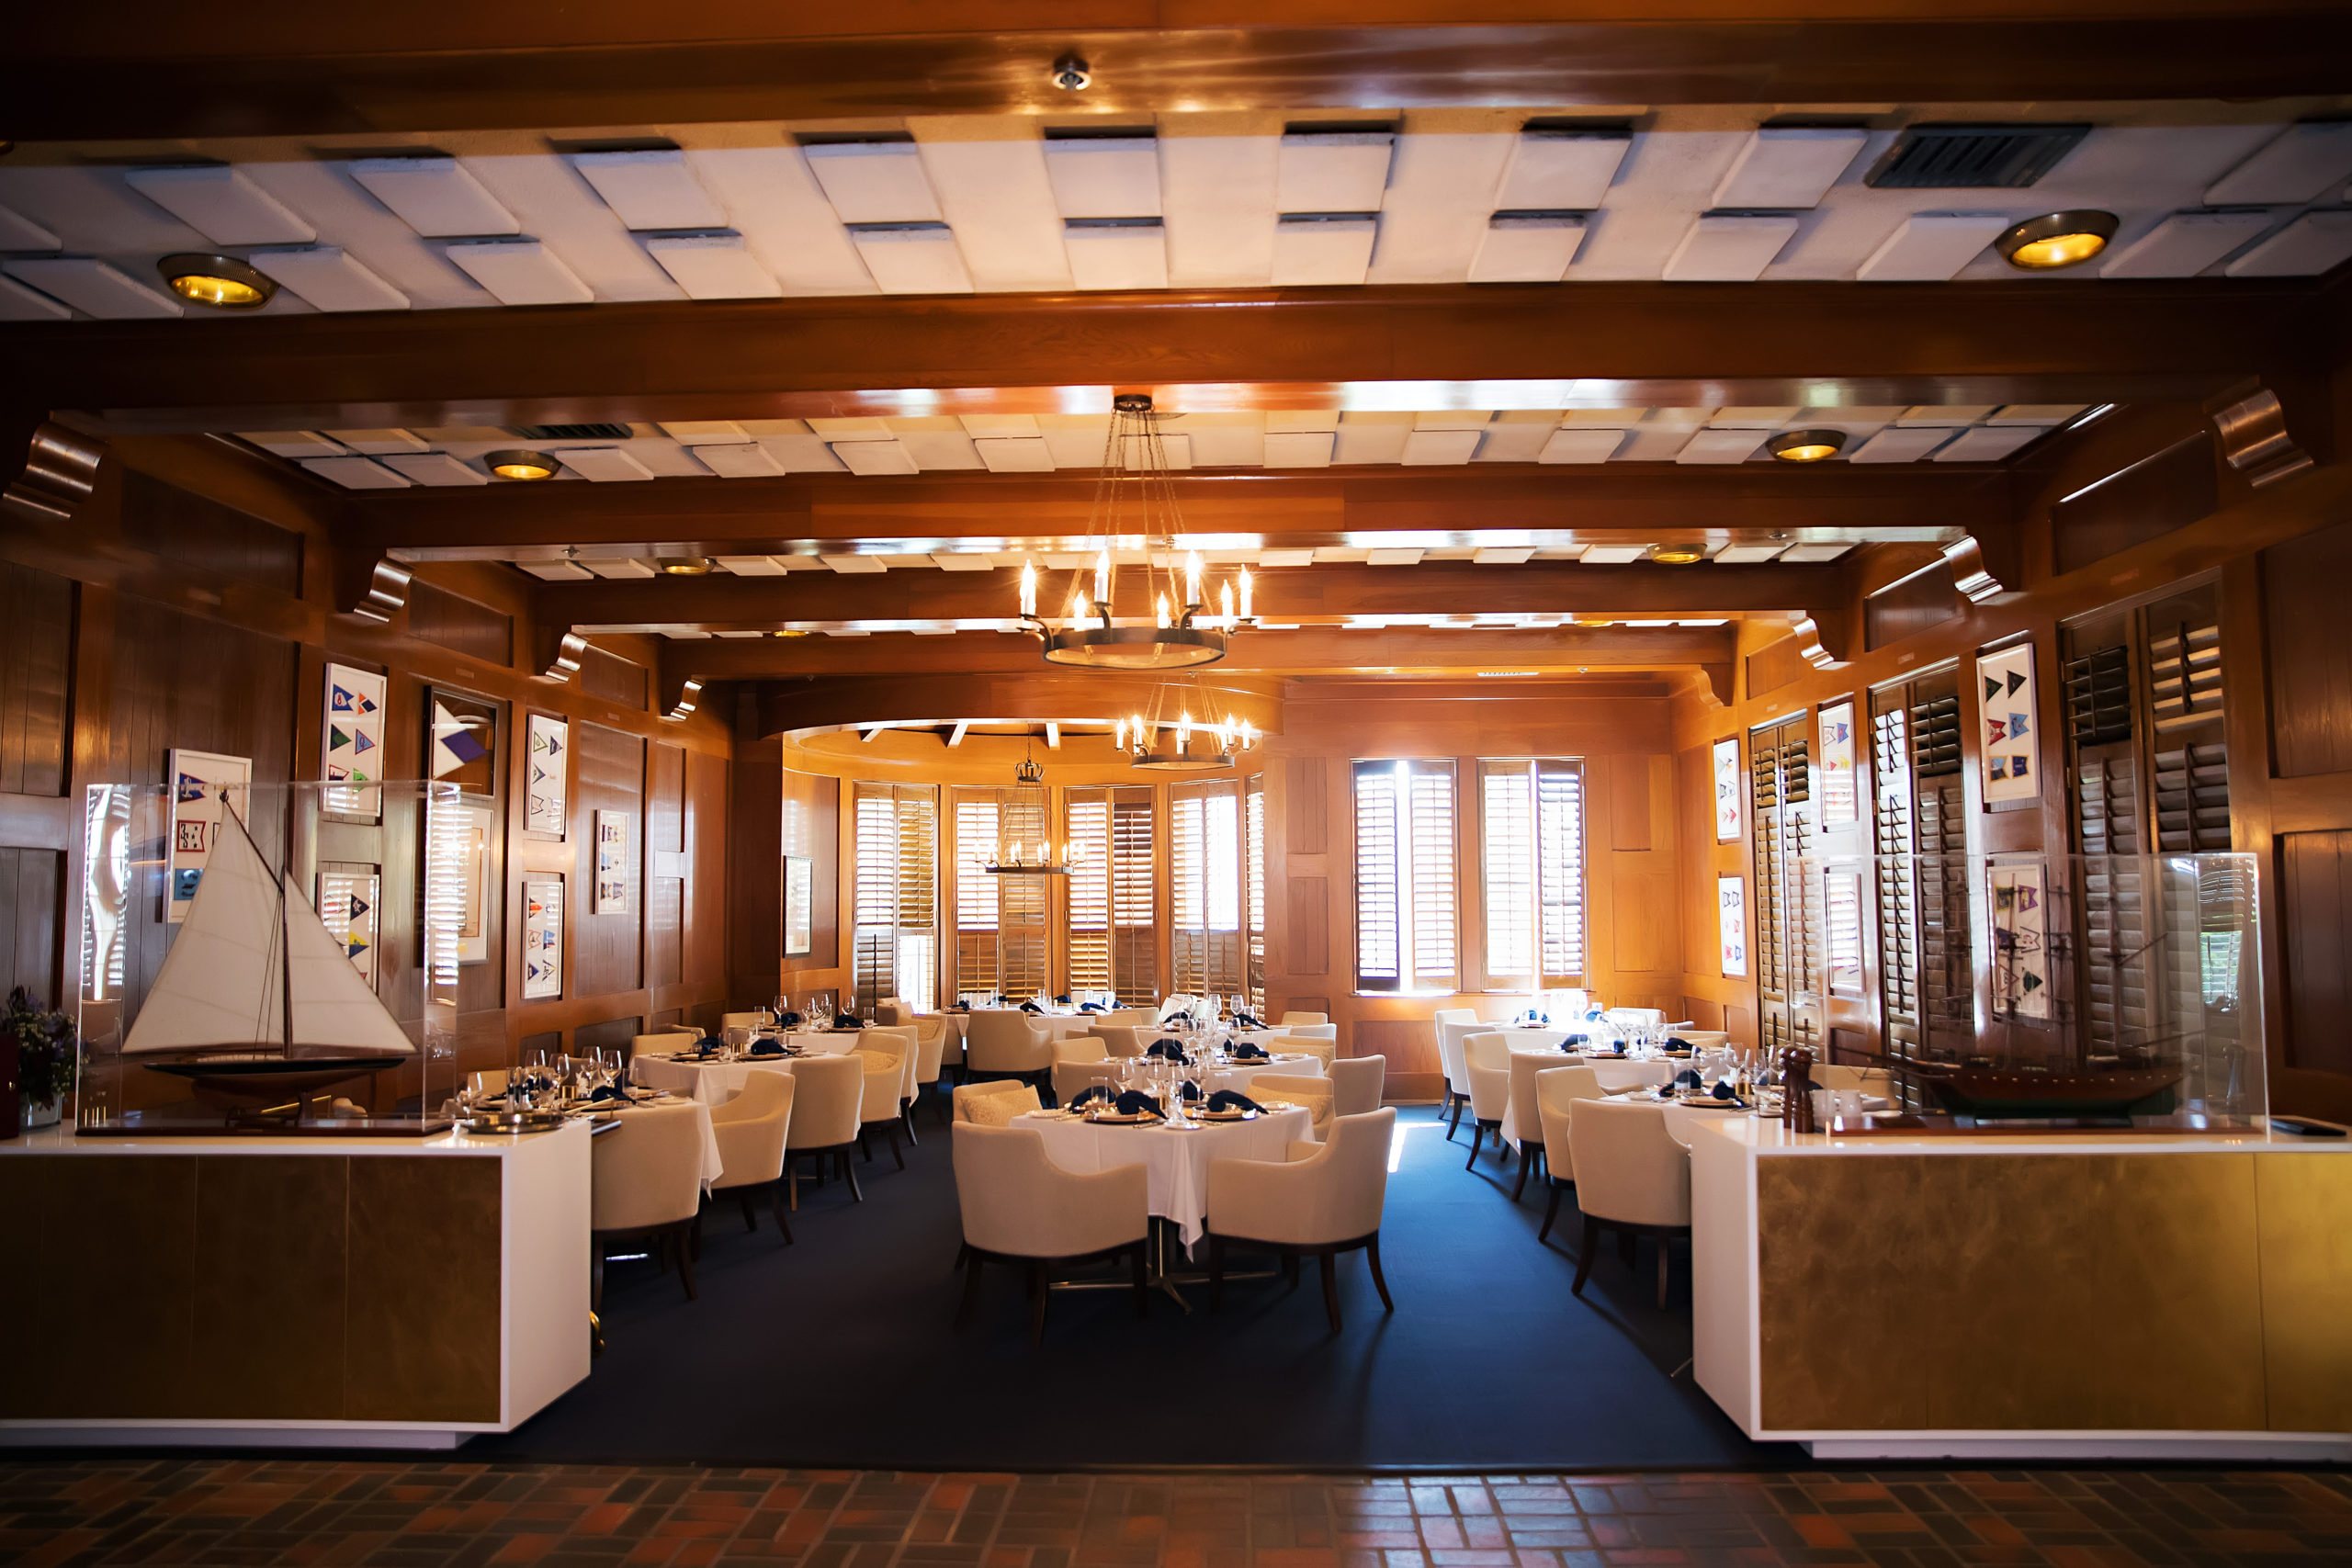 Tampa Yacht & Country Club's Pilot House dining room has been newly renovated and designed by Janet Perry and Laura Bischofsberger of J. Banks Design Group.